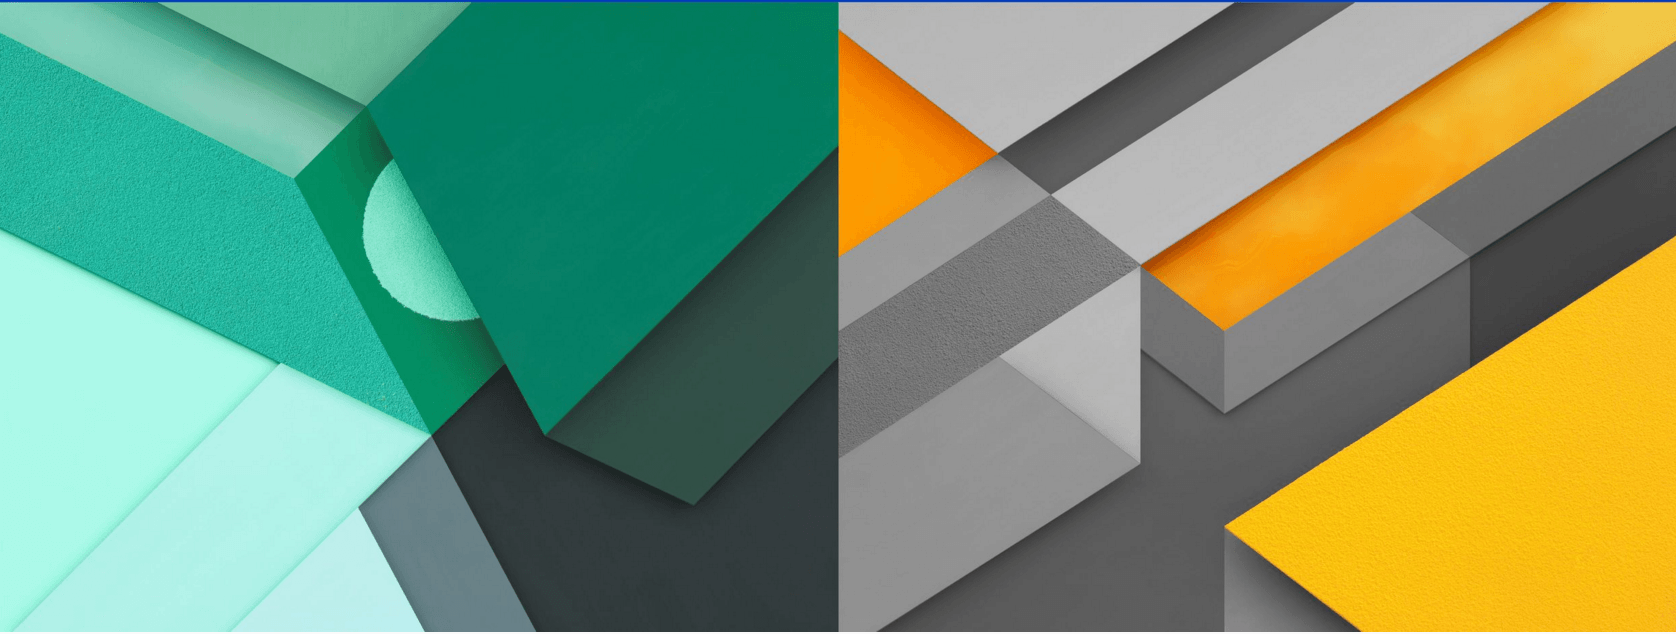 Android Marshmallow wallpaper get the Carl Kleiner treatment